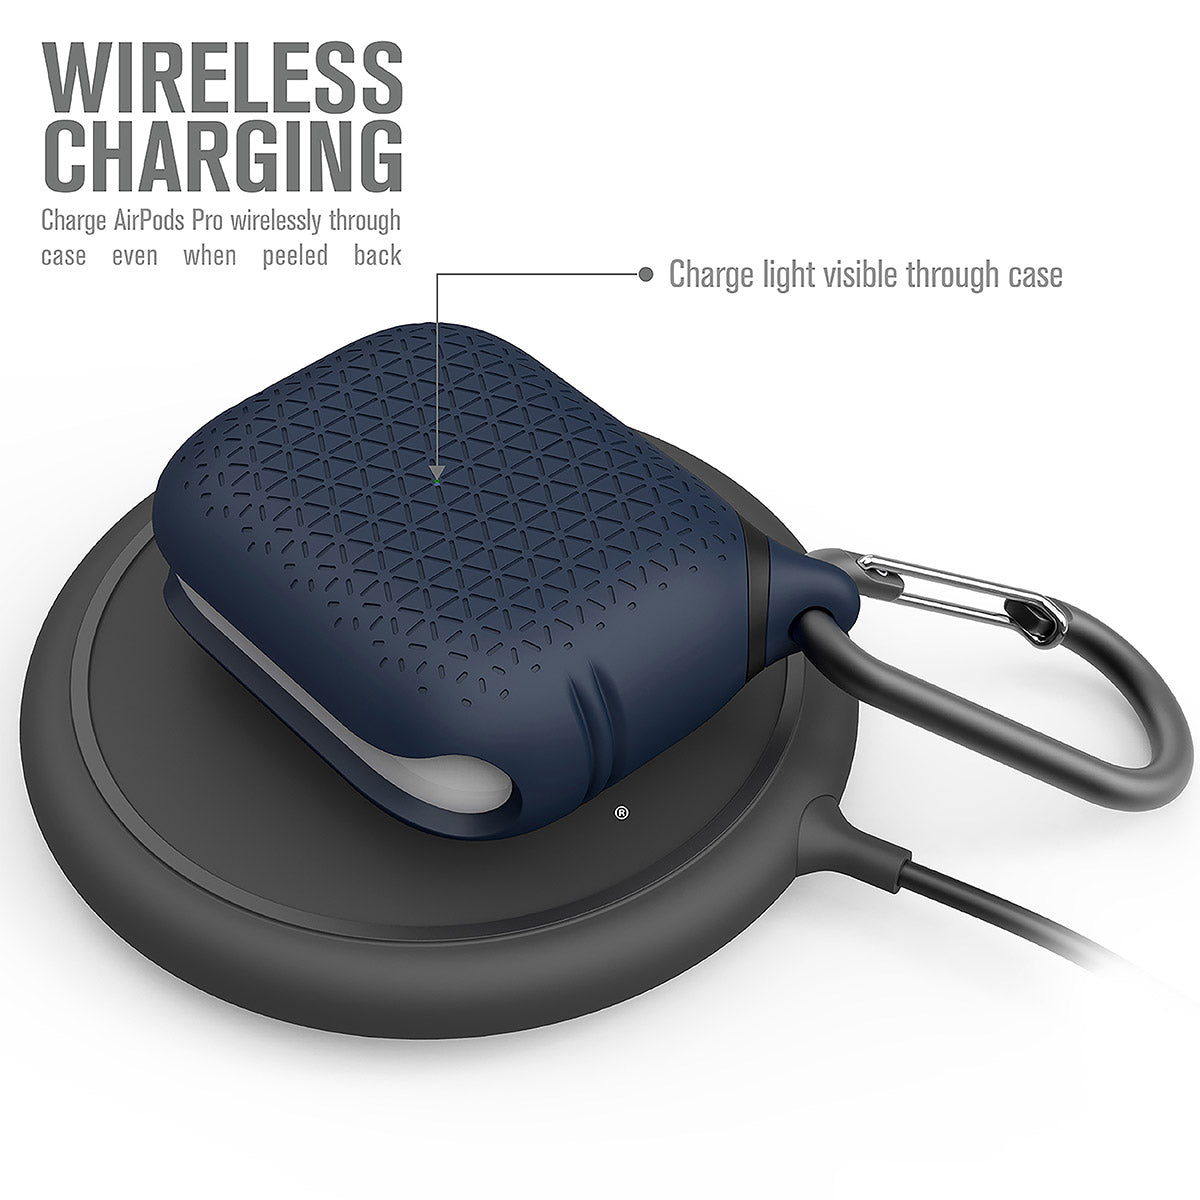 catalyst airpods pro gen 2 1 waterproof case carabiner premium edition midnight blue on top of a wireless charger text reads wireless charging charge airpods pro wirelessly through case even when peeled back charge light visible through case